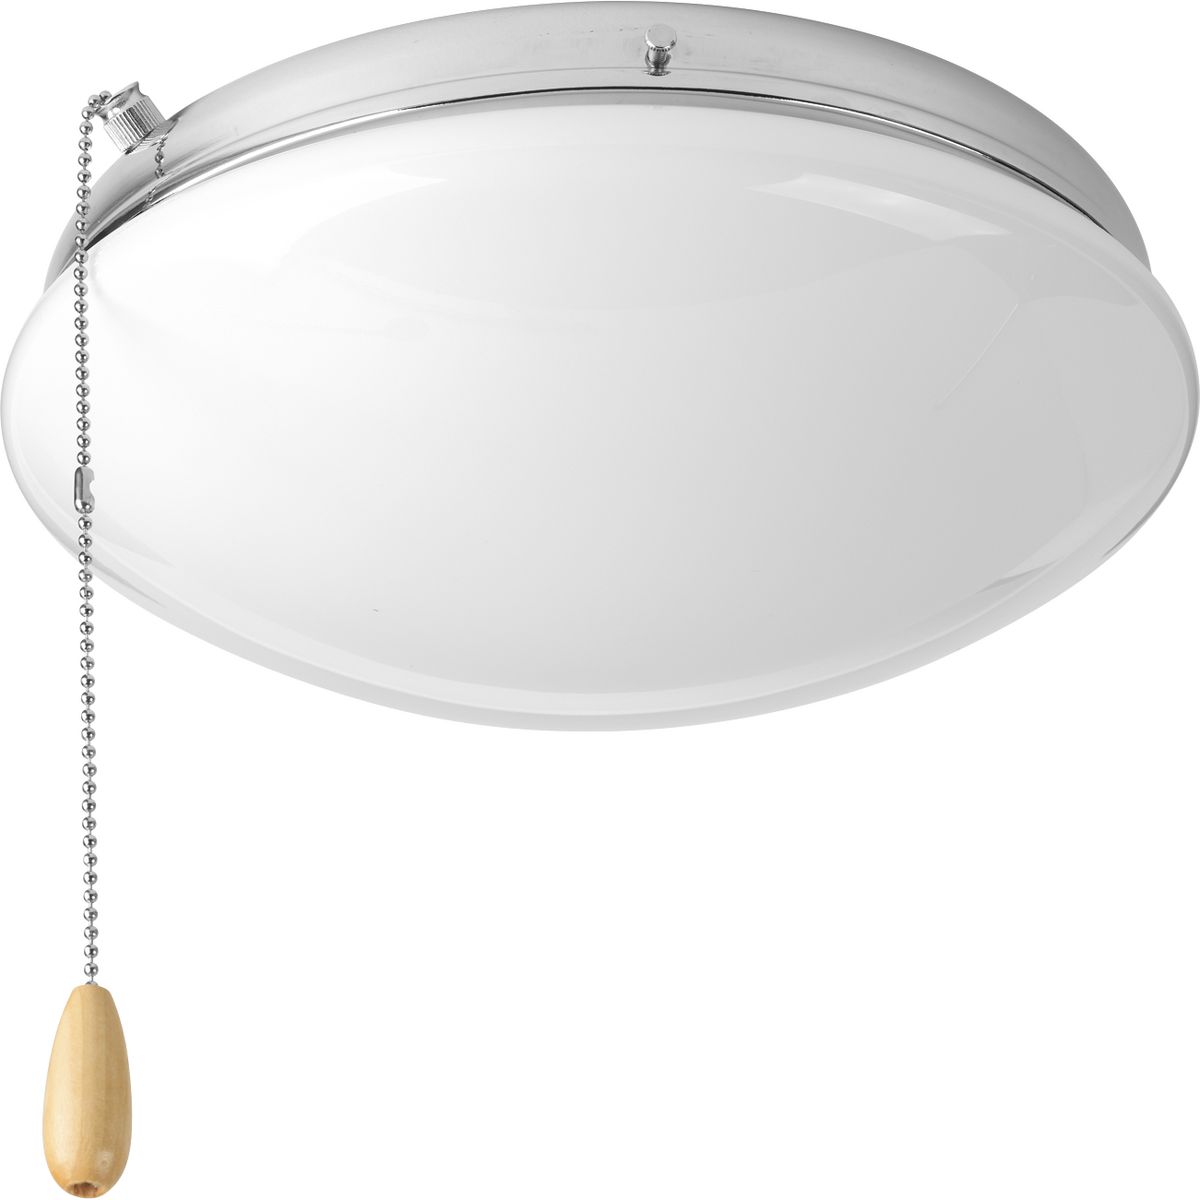 Two-light universal-style ceiling fan light kit features a low-profile, opal glass diffuser that's ideal for lighting in a bedroom. This fan light kit includes a threaded adapter for quick connection to most indoor ceiling fans that accept an accessory light. Includes two 3000K, 800 lumen each (source), Title 24 certified LED bulbs. Polished Chrome finish.